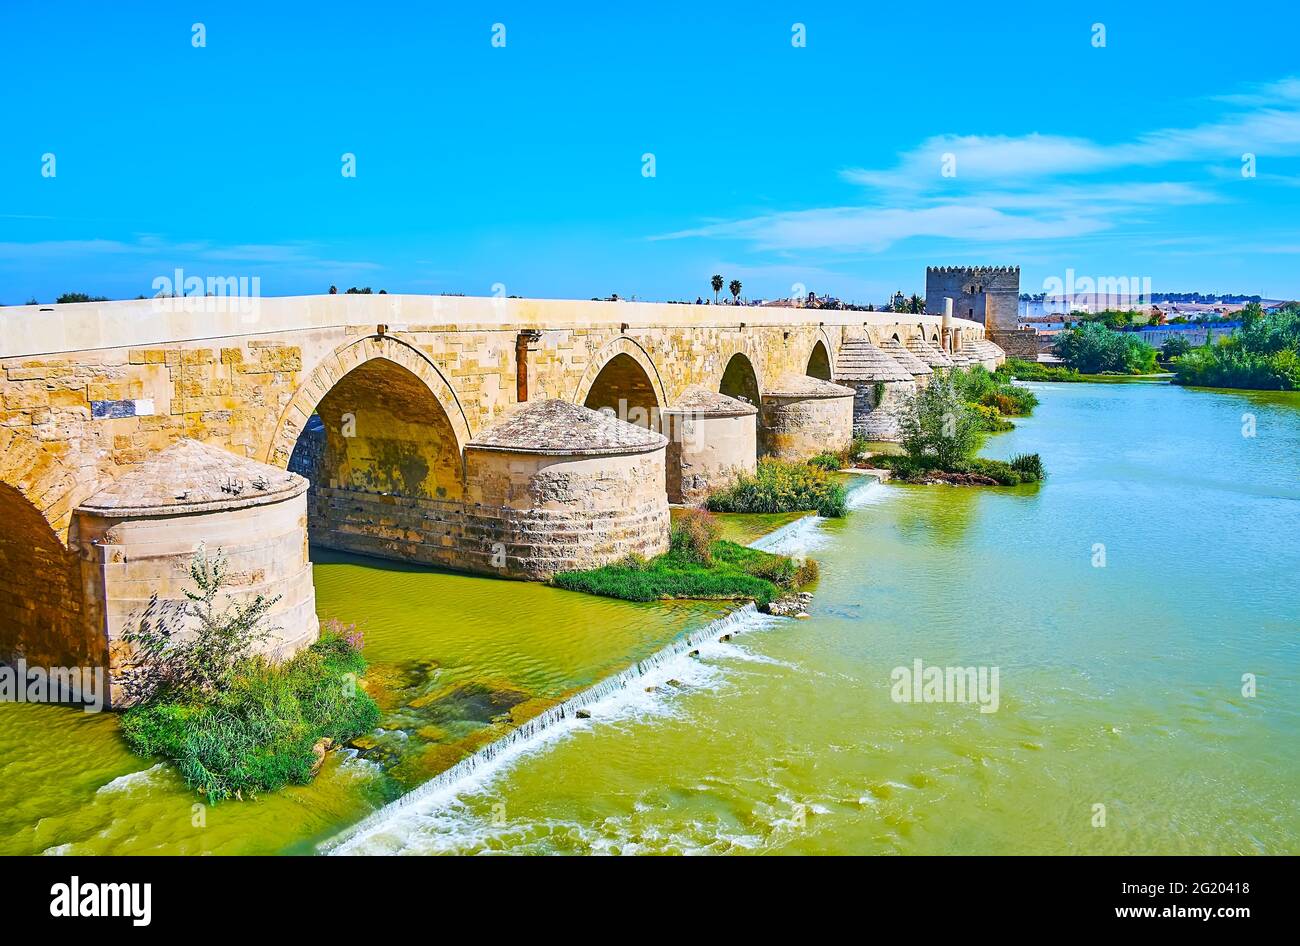 Enjoy Guadalquivir river with a view on the  ancient Roman Bridge and Calahorra Tower in background, Cordoba, Spain Stock Photo